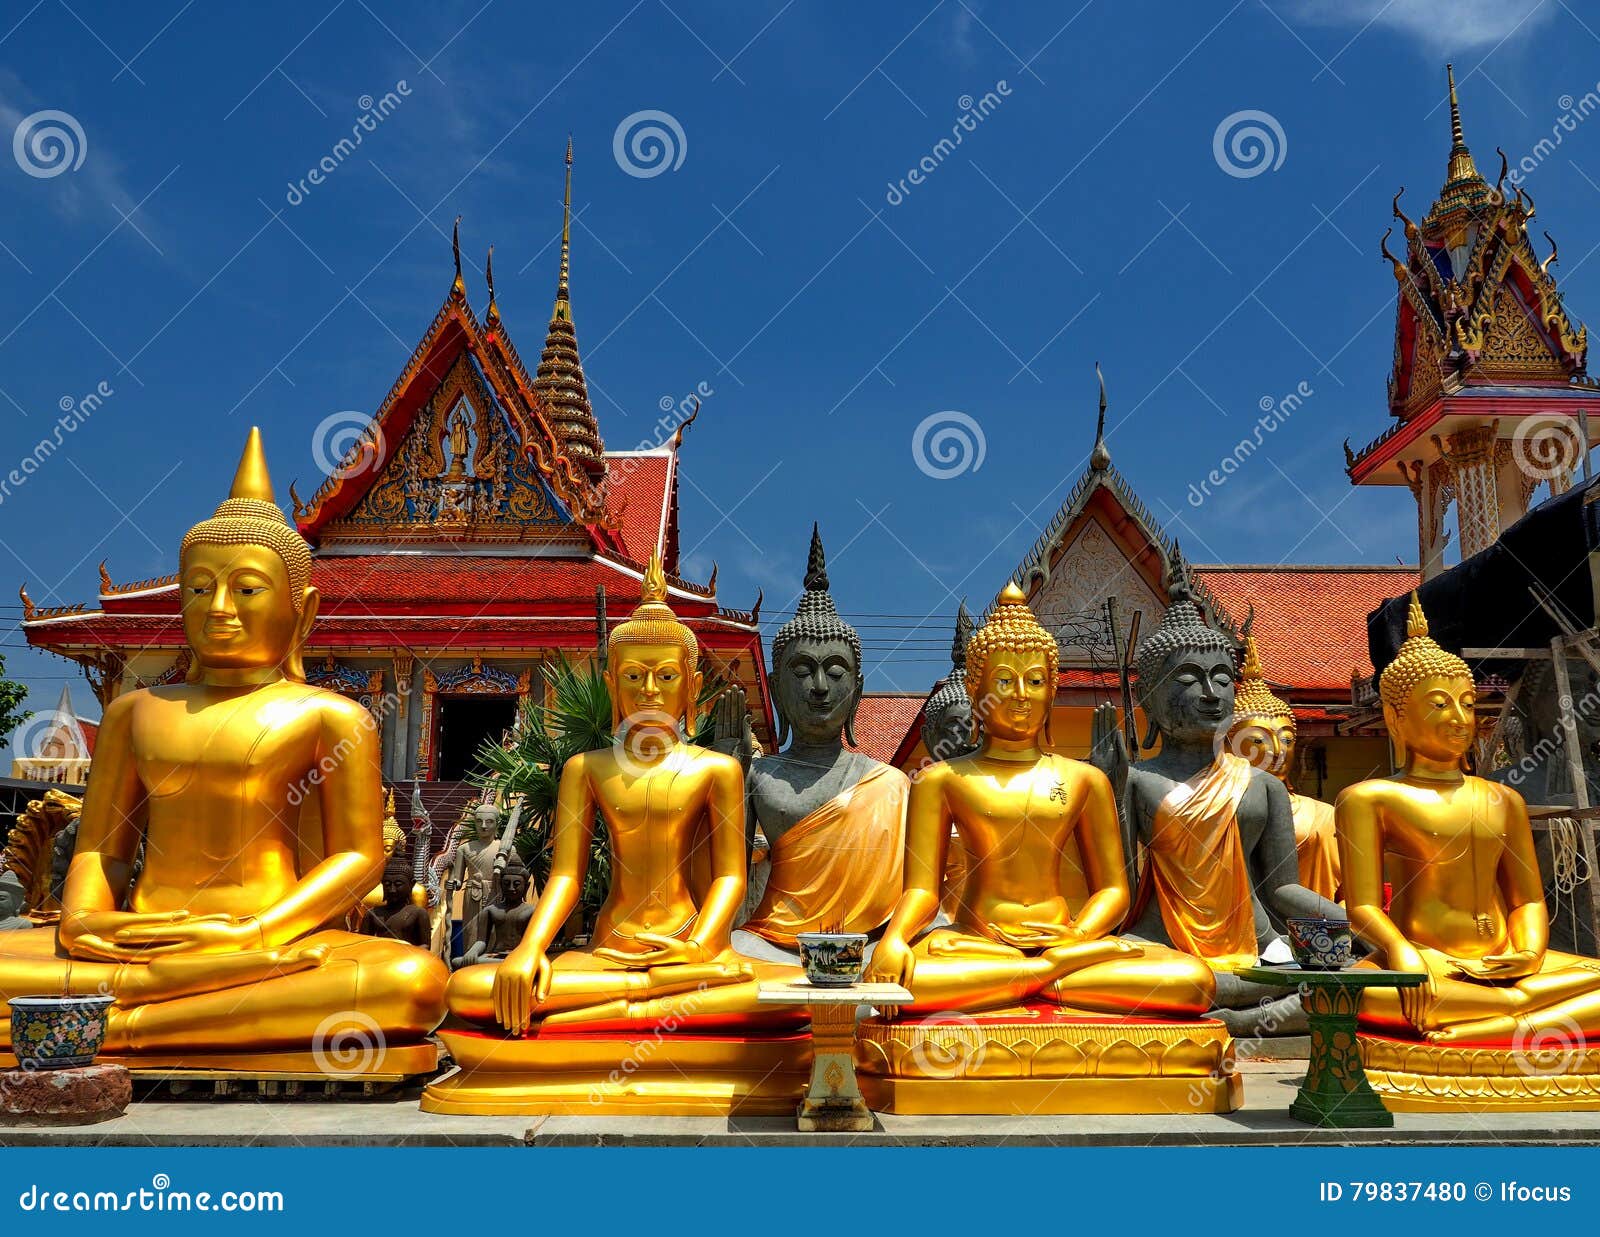 Buddha Statues At Thai Temple Stock Photo Image Of Icon Outdoor